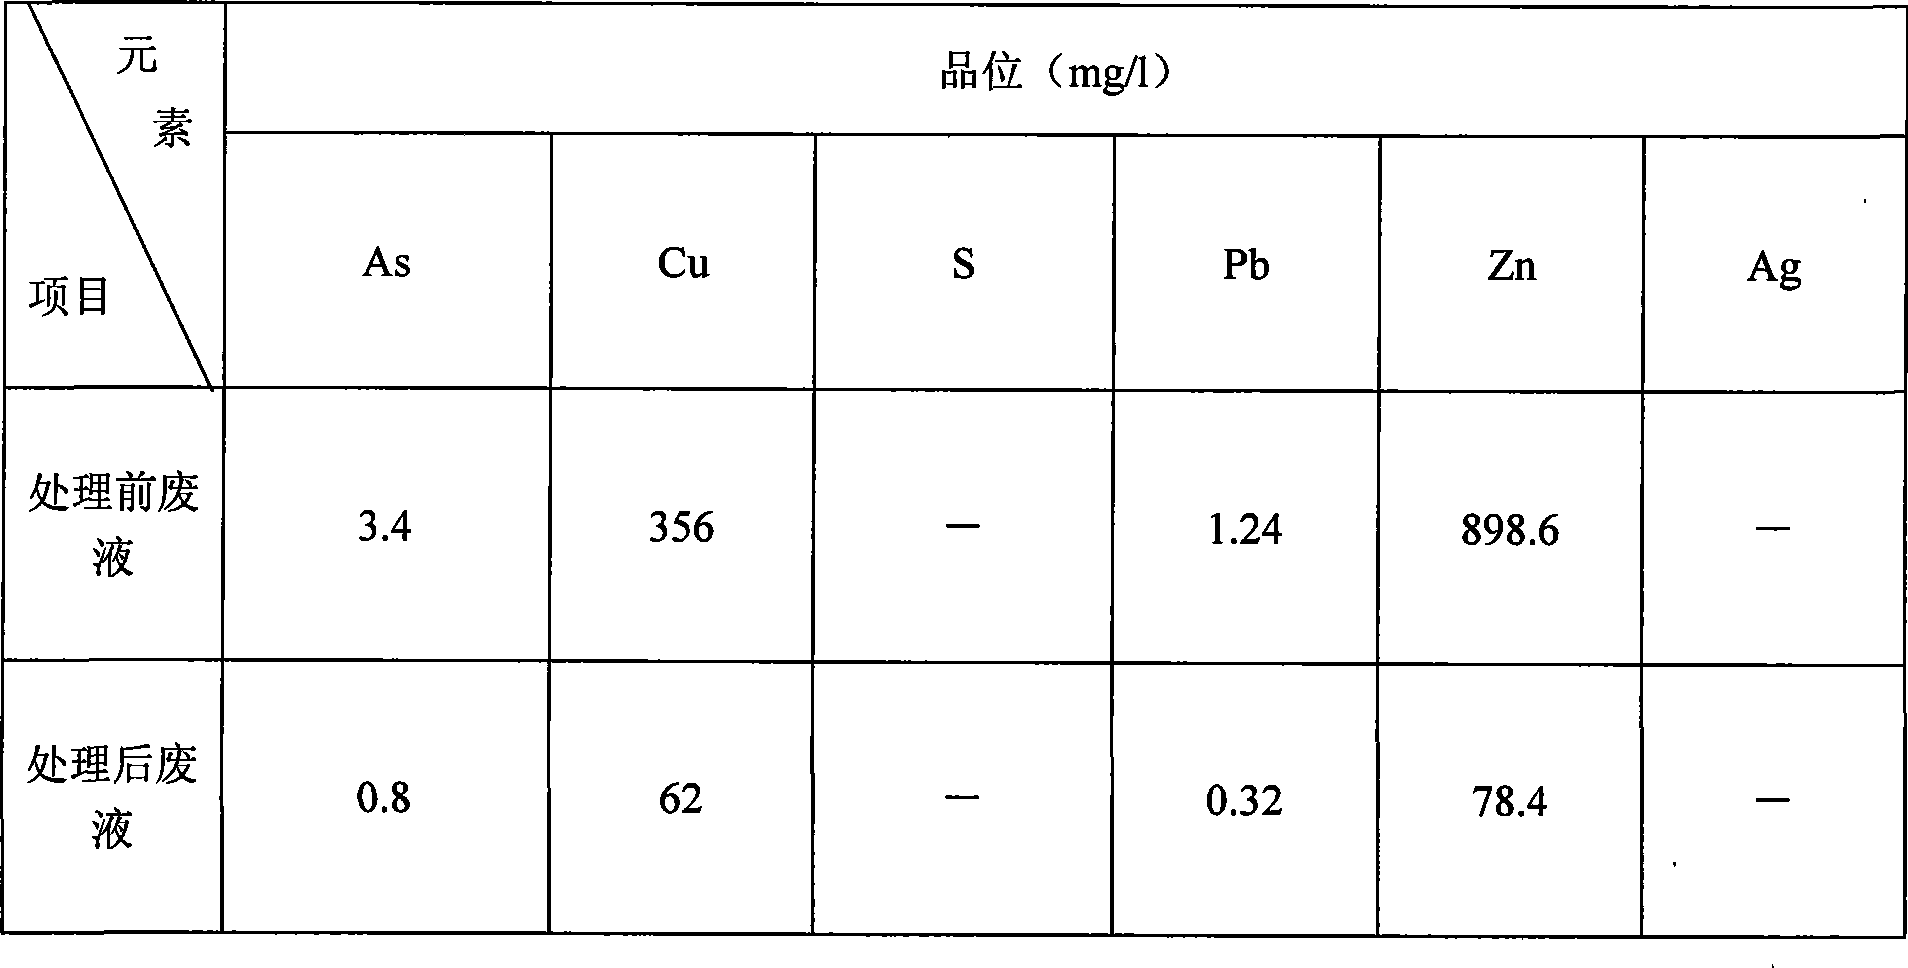 Method for treating cyaniding gold extraction waste water